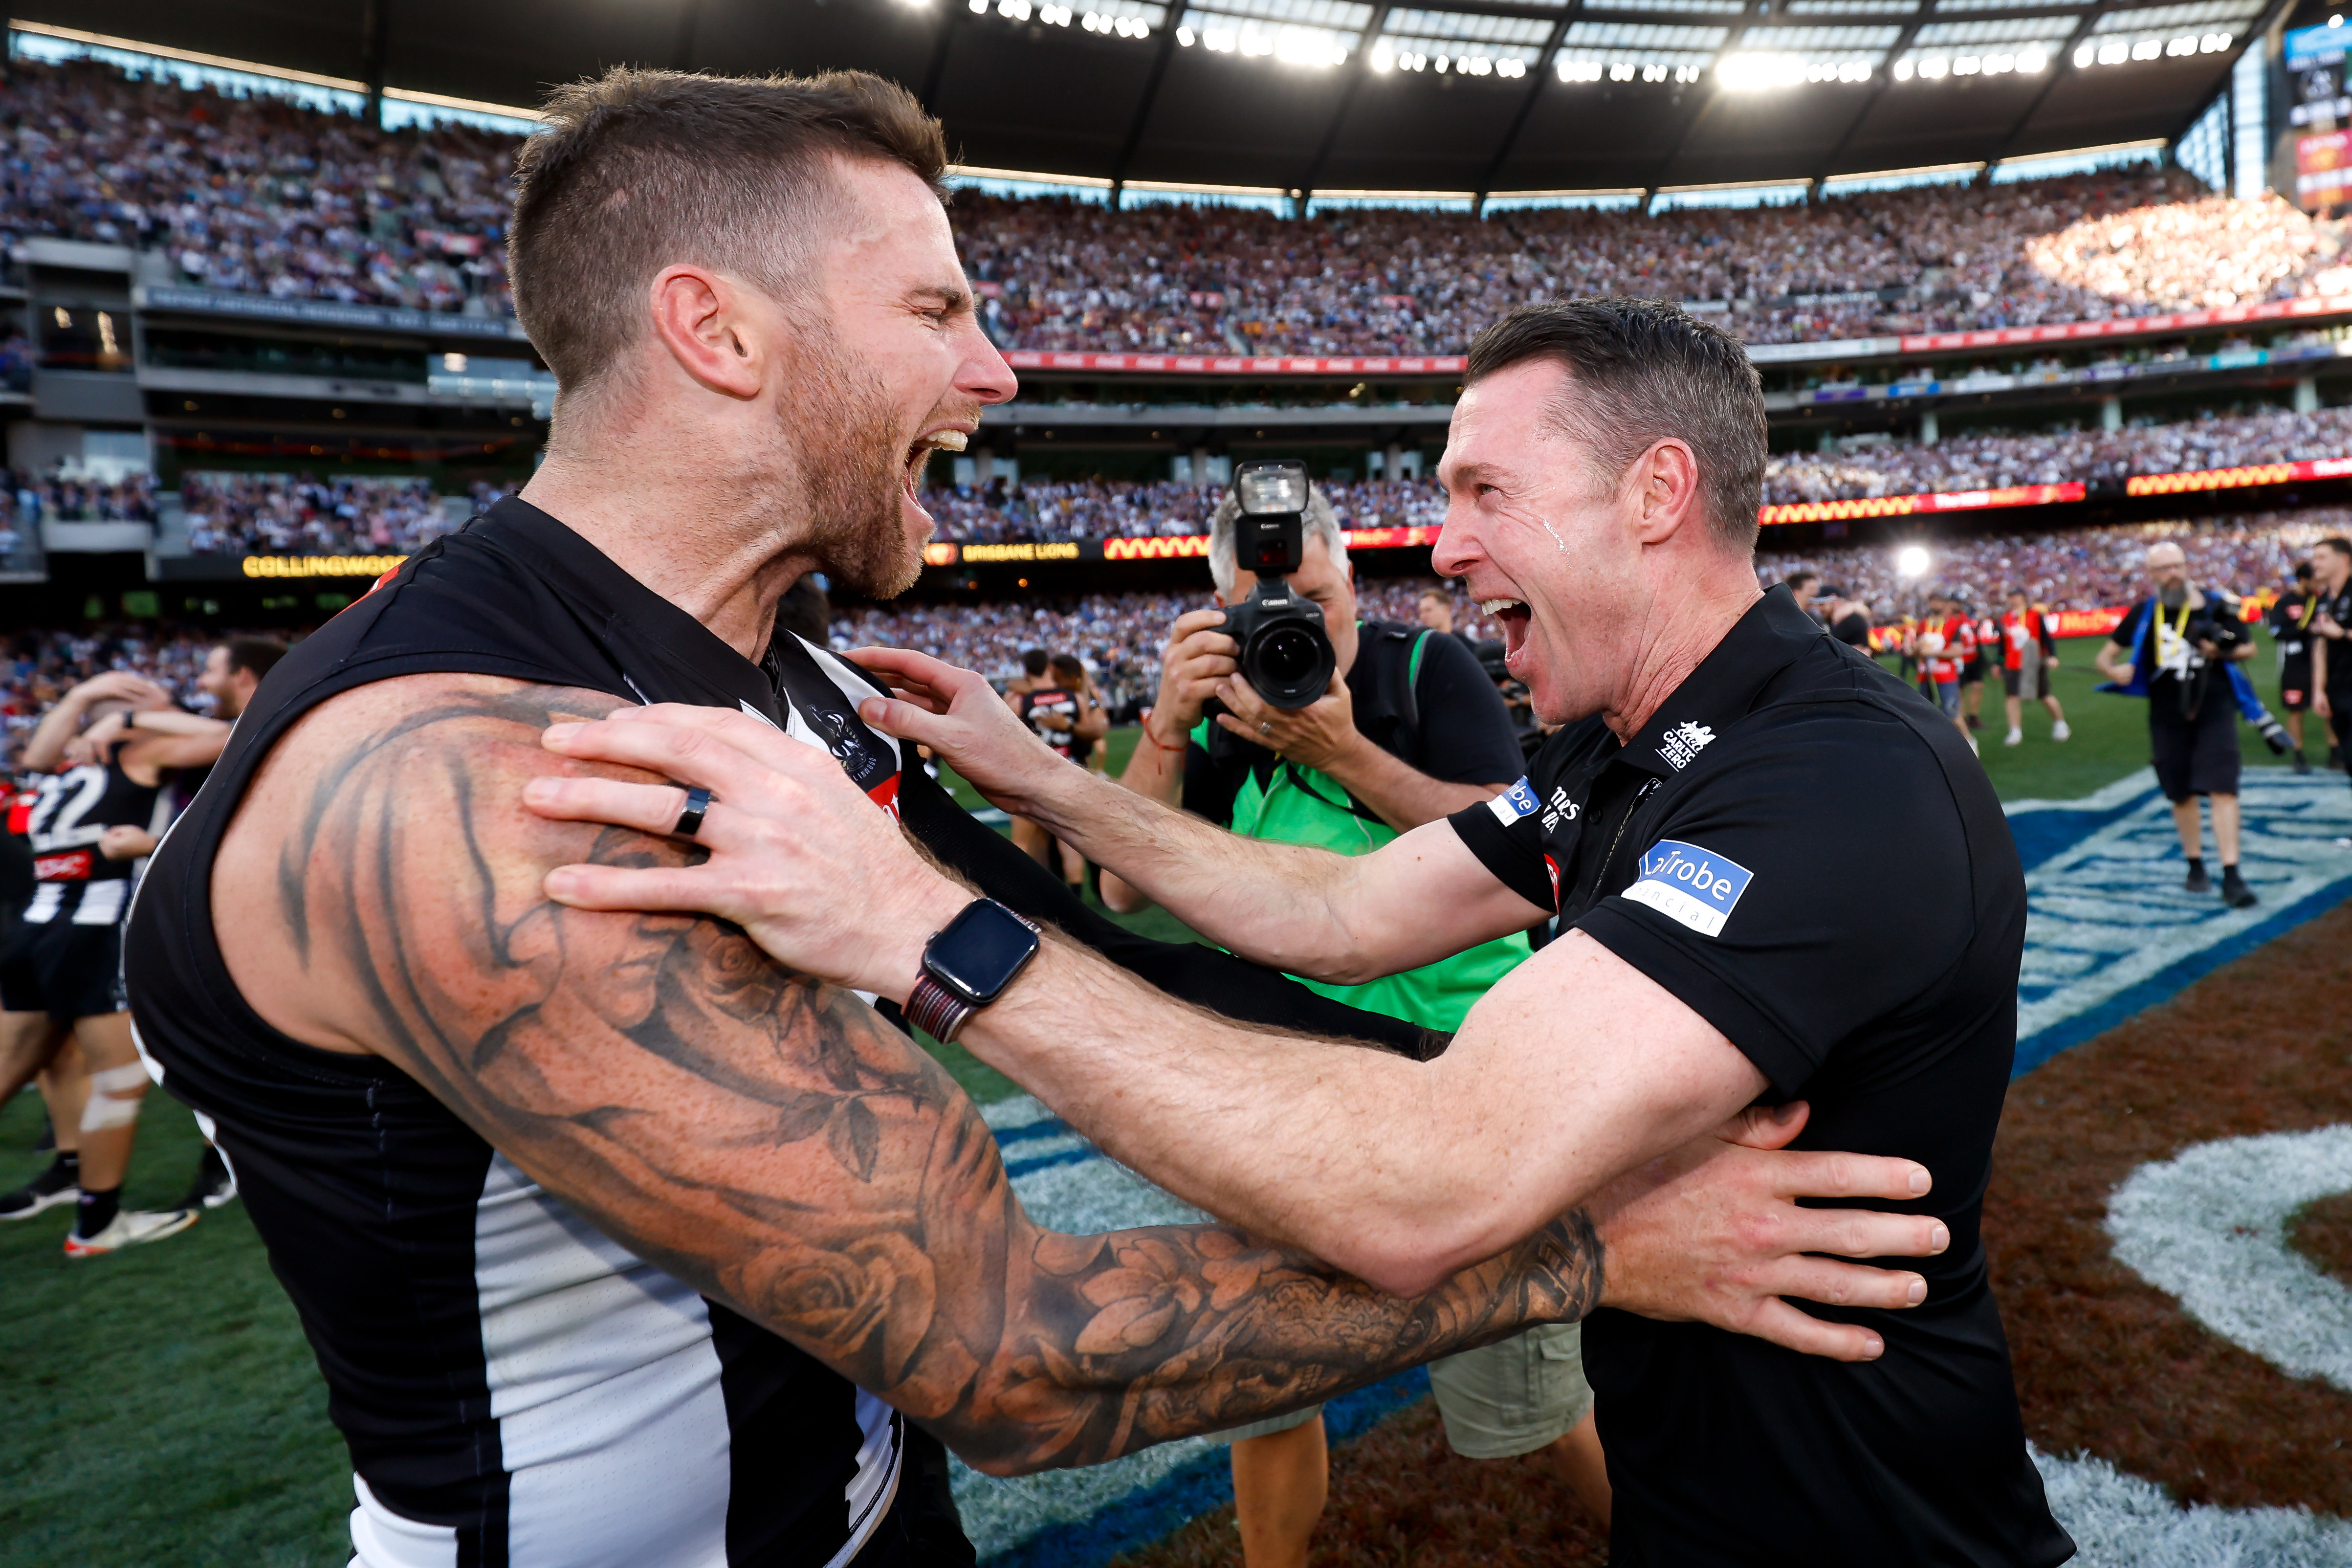 MELBOURNE, AUSTRALIA - SEPTEMBER 30: Jeremy Howe of the Magpies and Craig McRae, Senior Coach of the Magpies celebrate during the 2023 AFL Grand Final match between the Collingwood Magpies and the Brisbane Lions at the Melbourne Cricket Ground on September 30, 2023 in Melbourne, Australia. (Photo by Dylan Burns/AFL Photos via Getty Images)